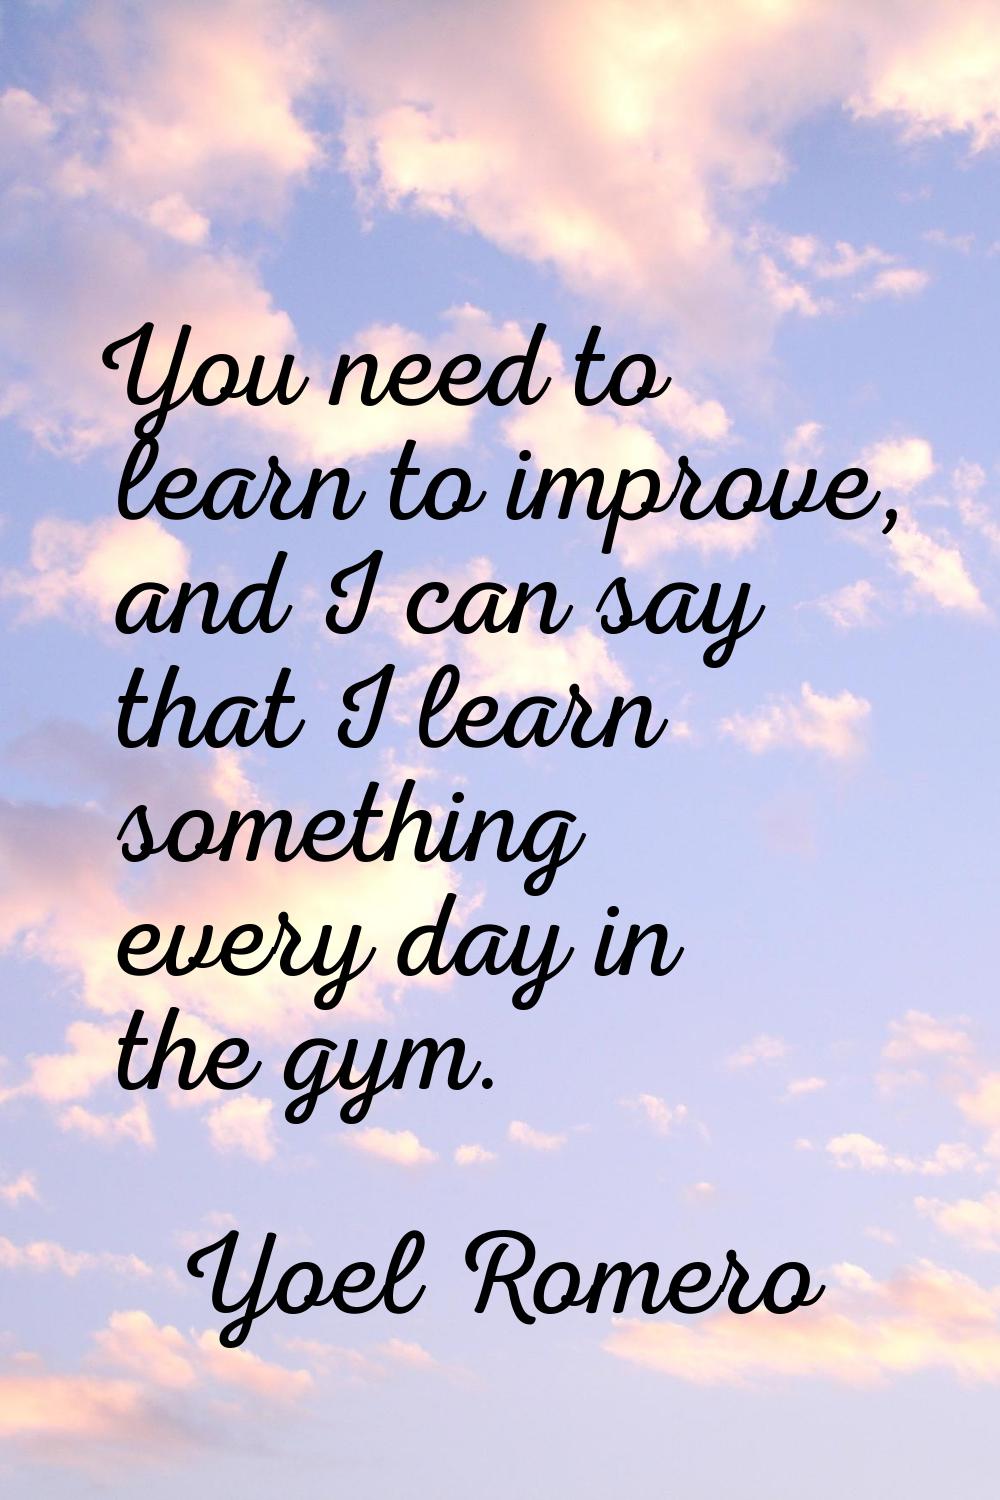 You need to learn to improve, and I can say that I learn something every day in the gym.